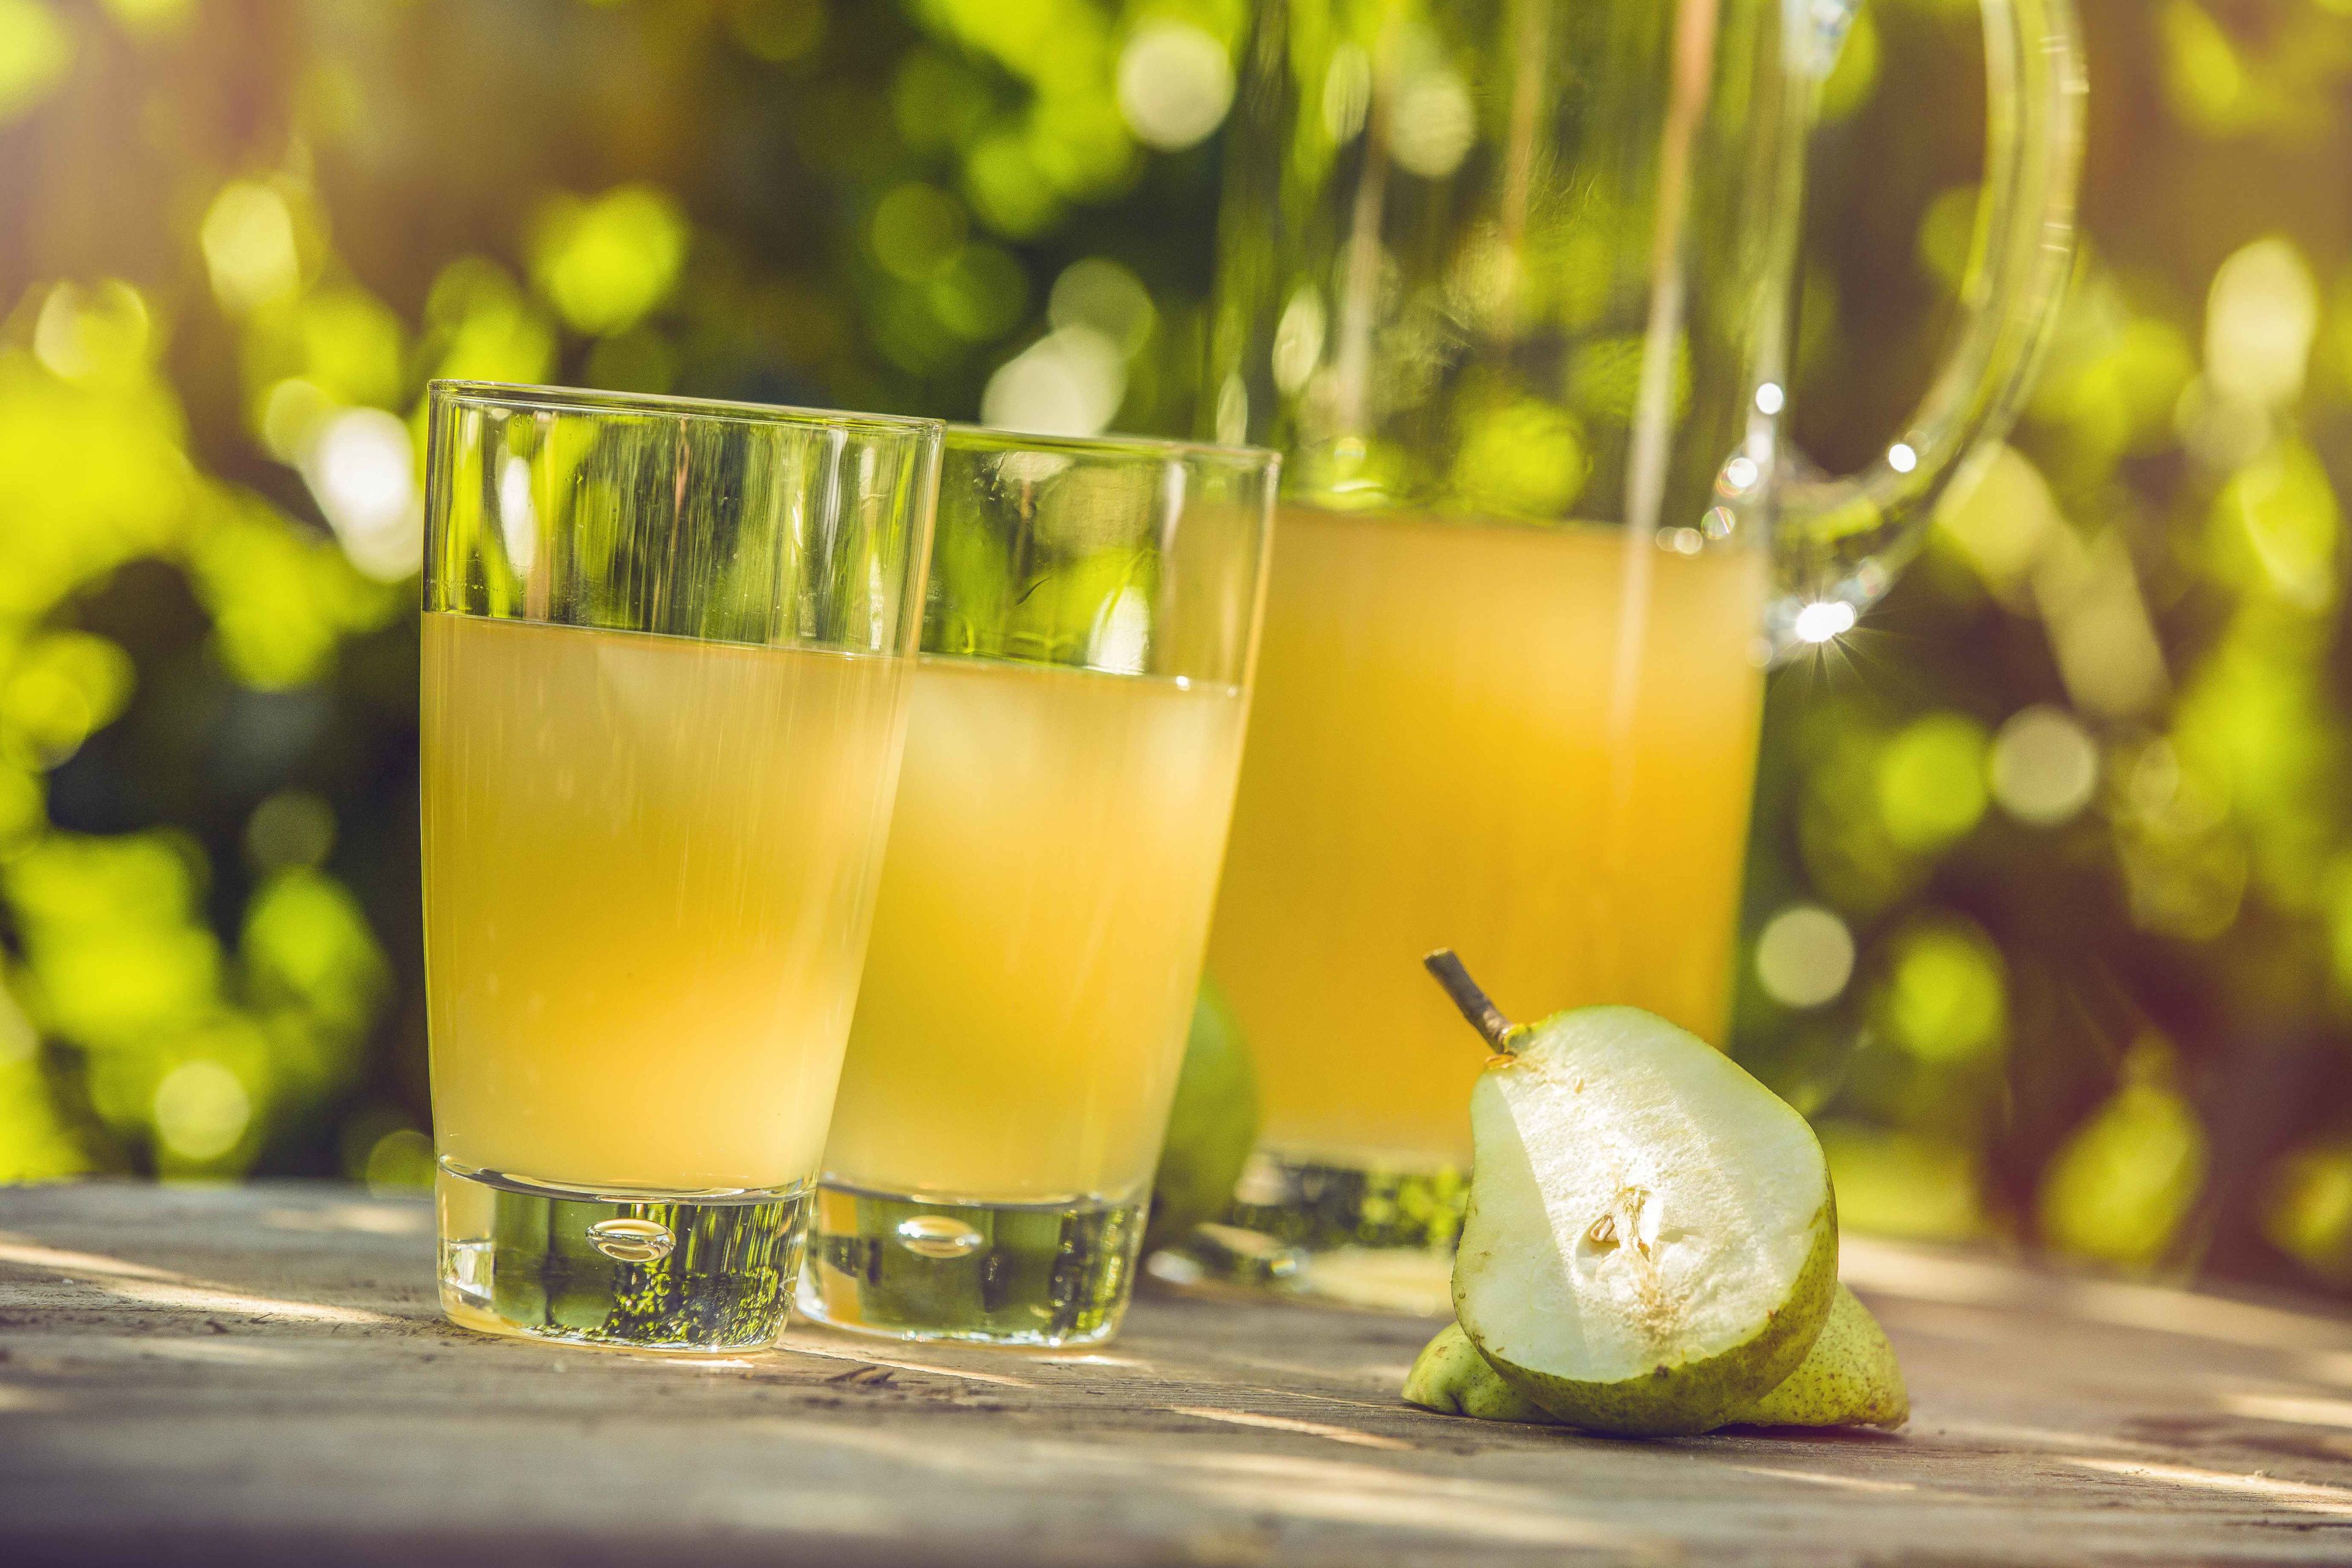 Freshly squeezed pear juice with Valais Williams pears, Valais Wallis Schweiz Suisse